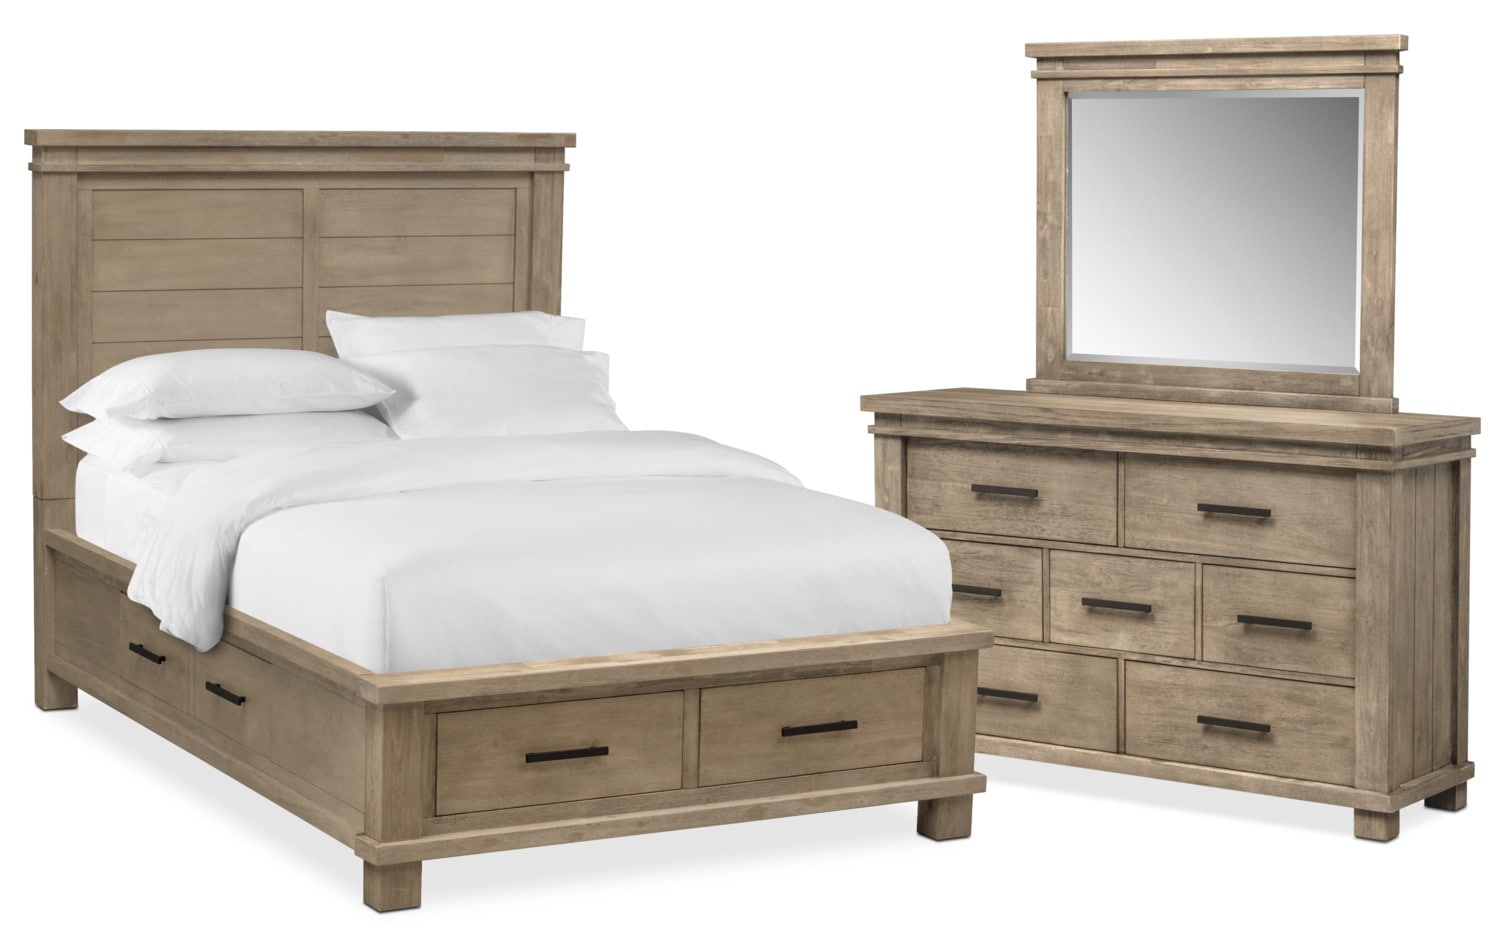 Tribeca 5 Piece Storage Bedroom Set With 4 Underbed Drawers Dresser And Mirror Value City Furniture